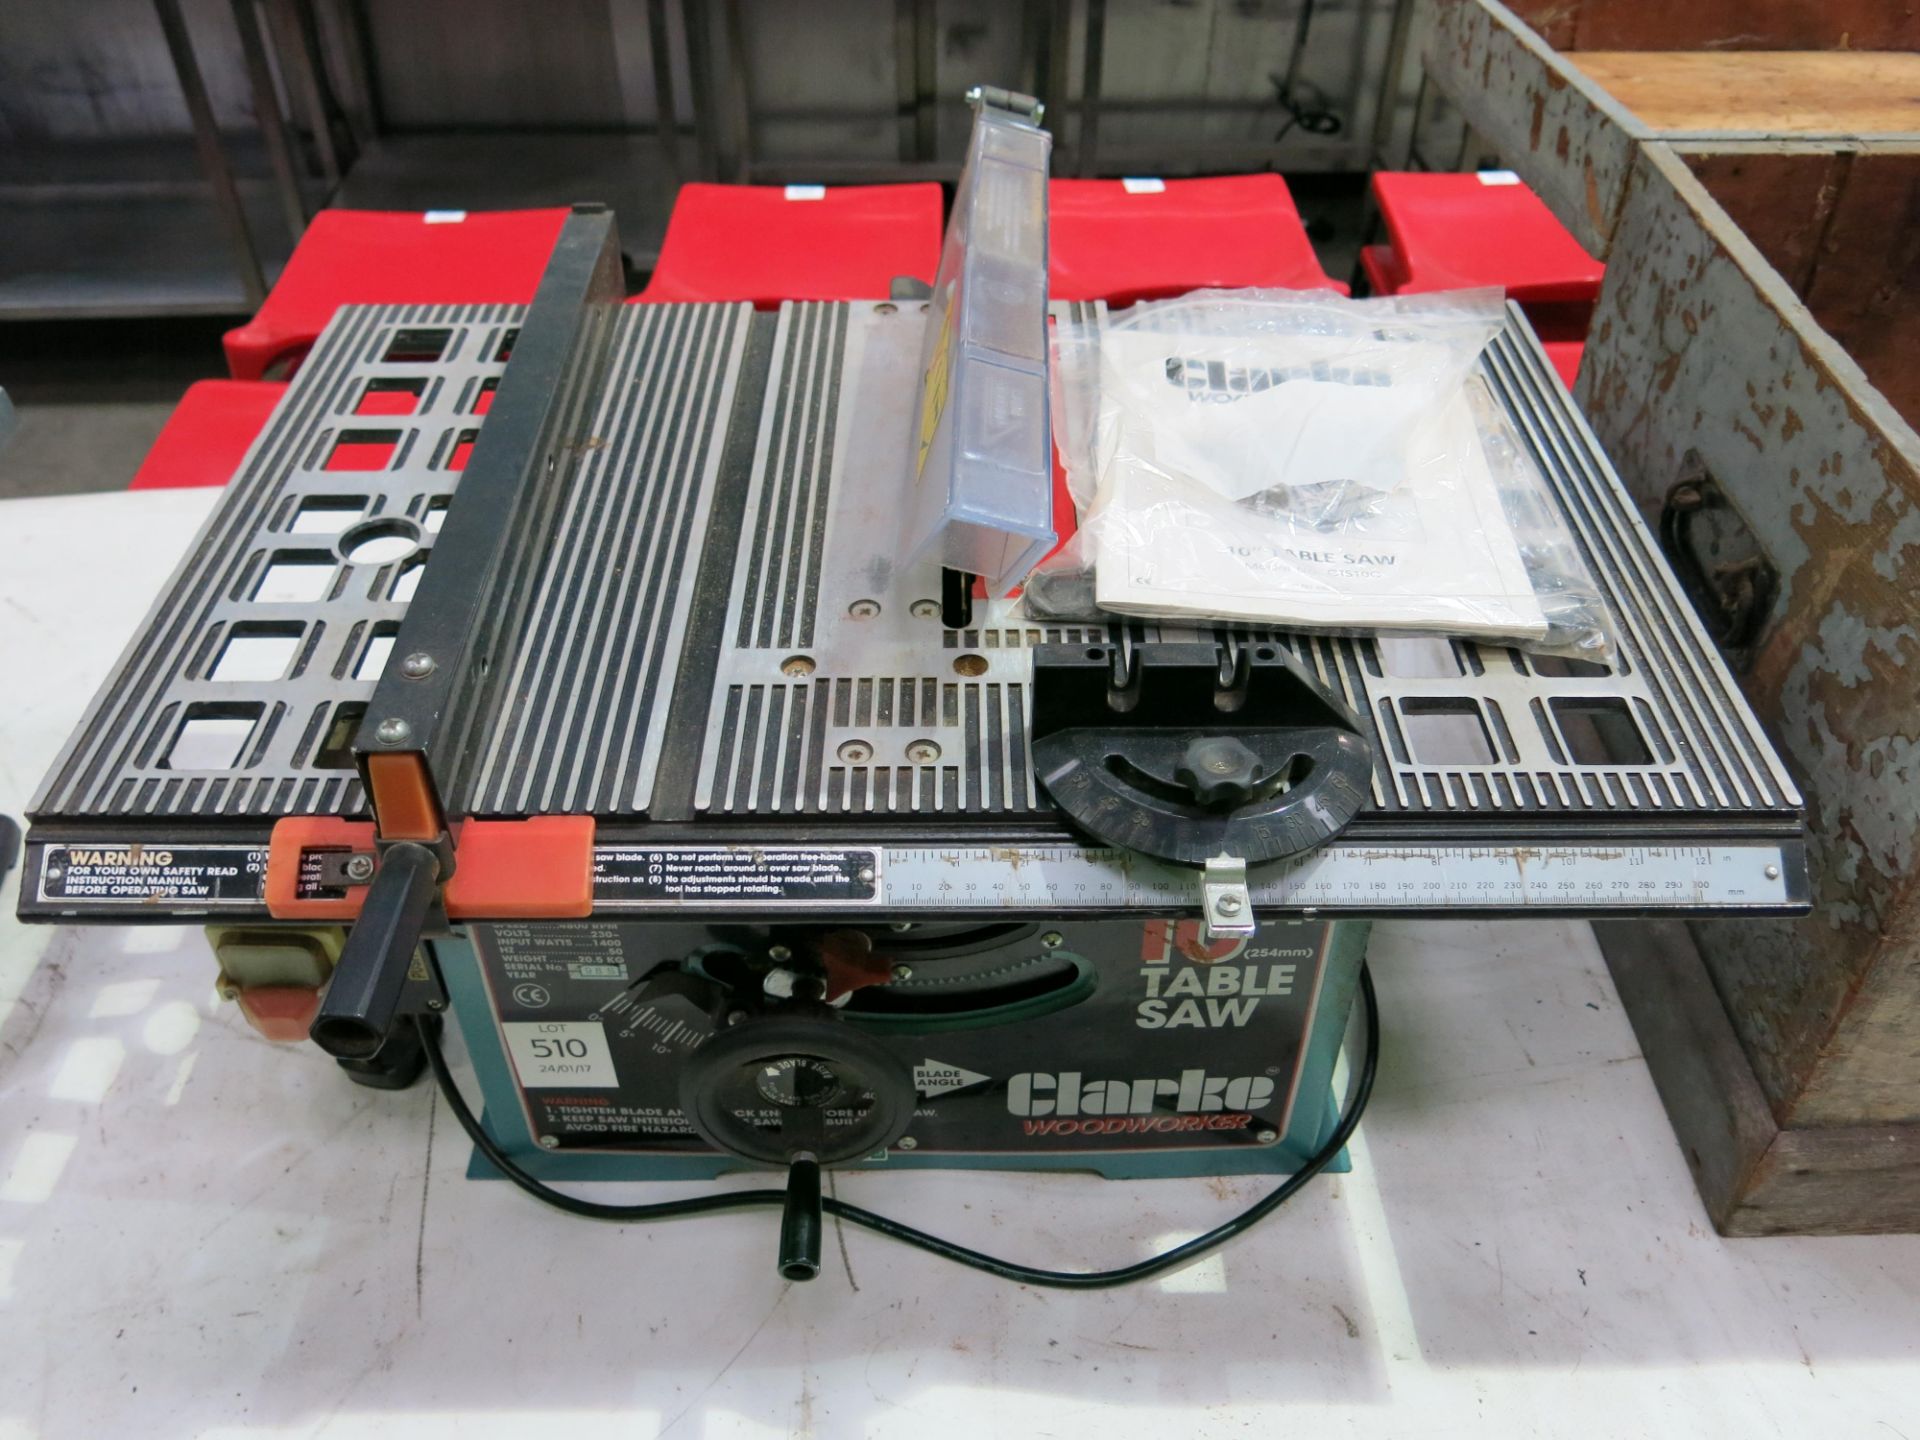 * A Clarke Woodworker 10'' table saw